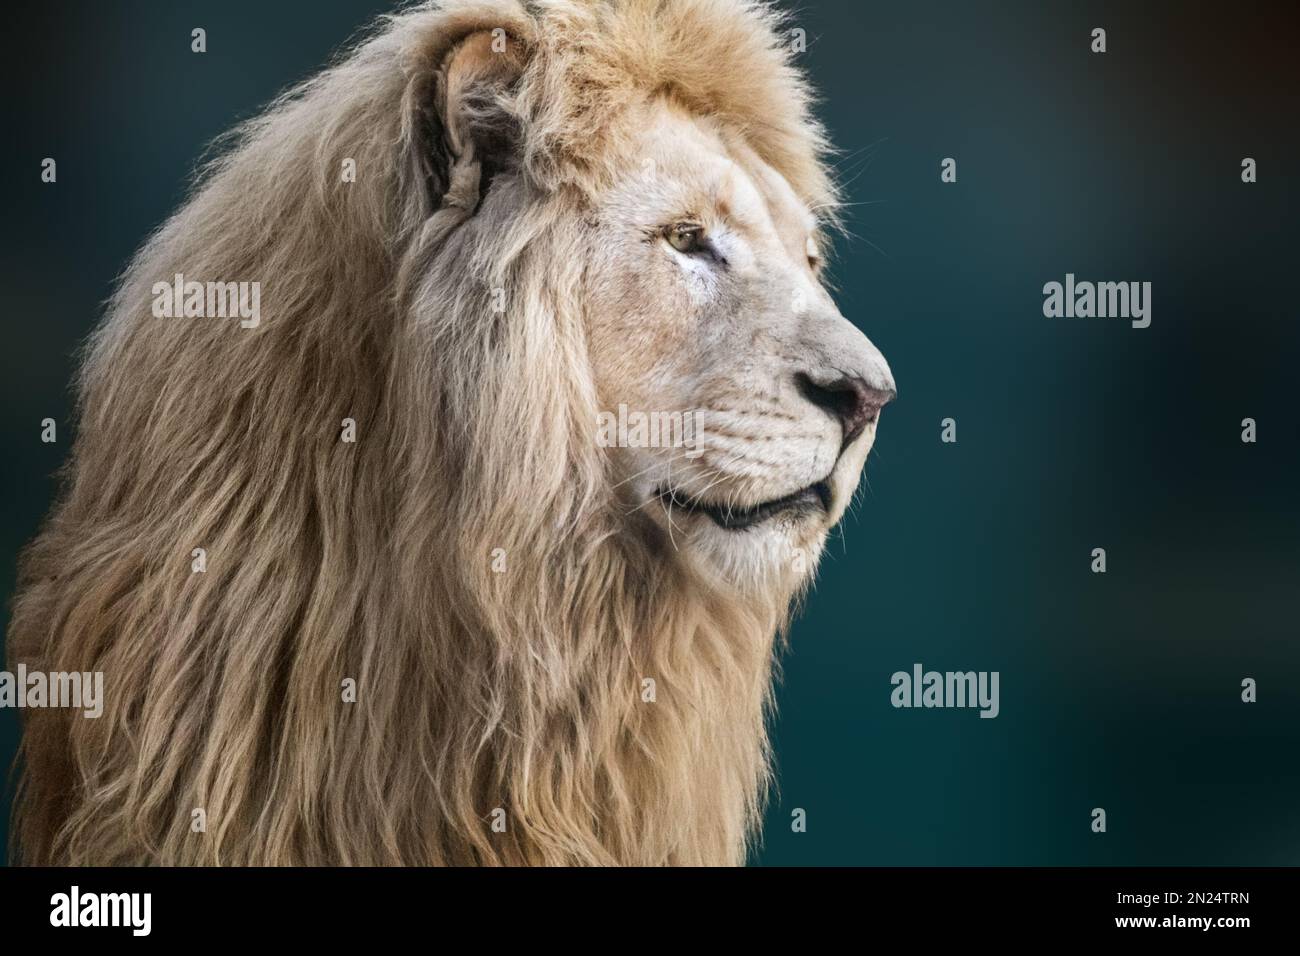 White lion portrait, looking right close-up with blurred background. Wild animals, big cat profile Stock Photo